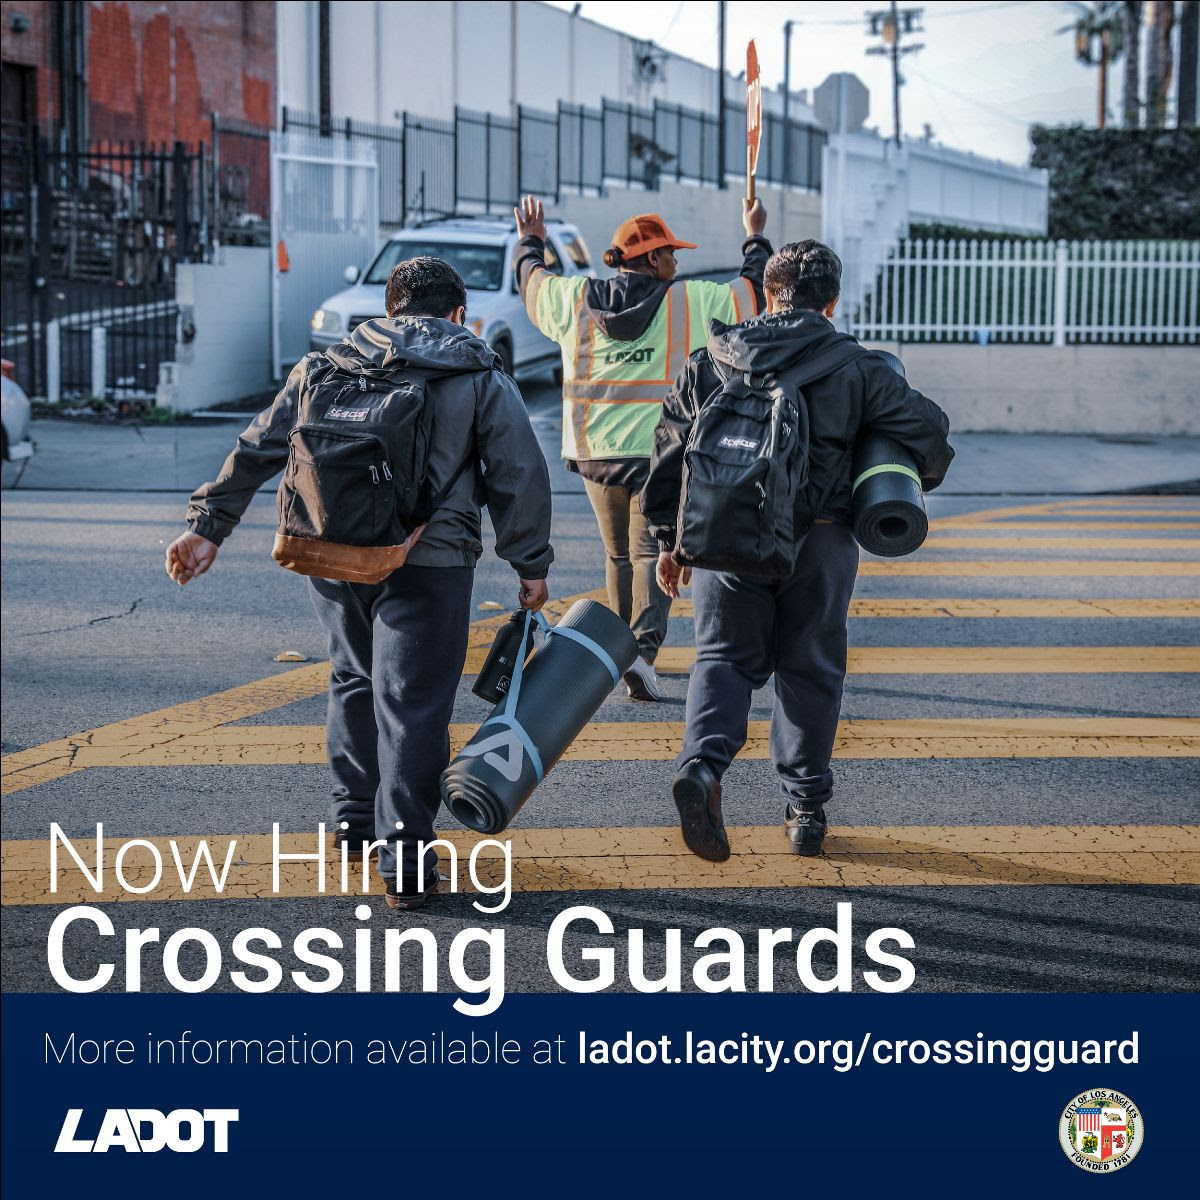 LADOT Now Hiring Crossing Guards